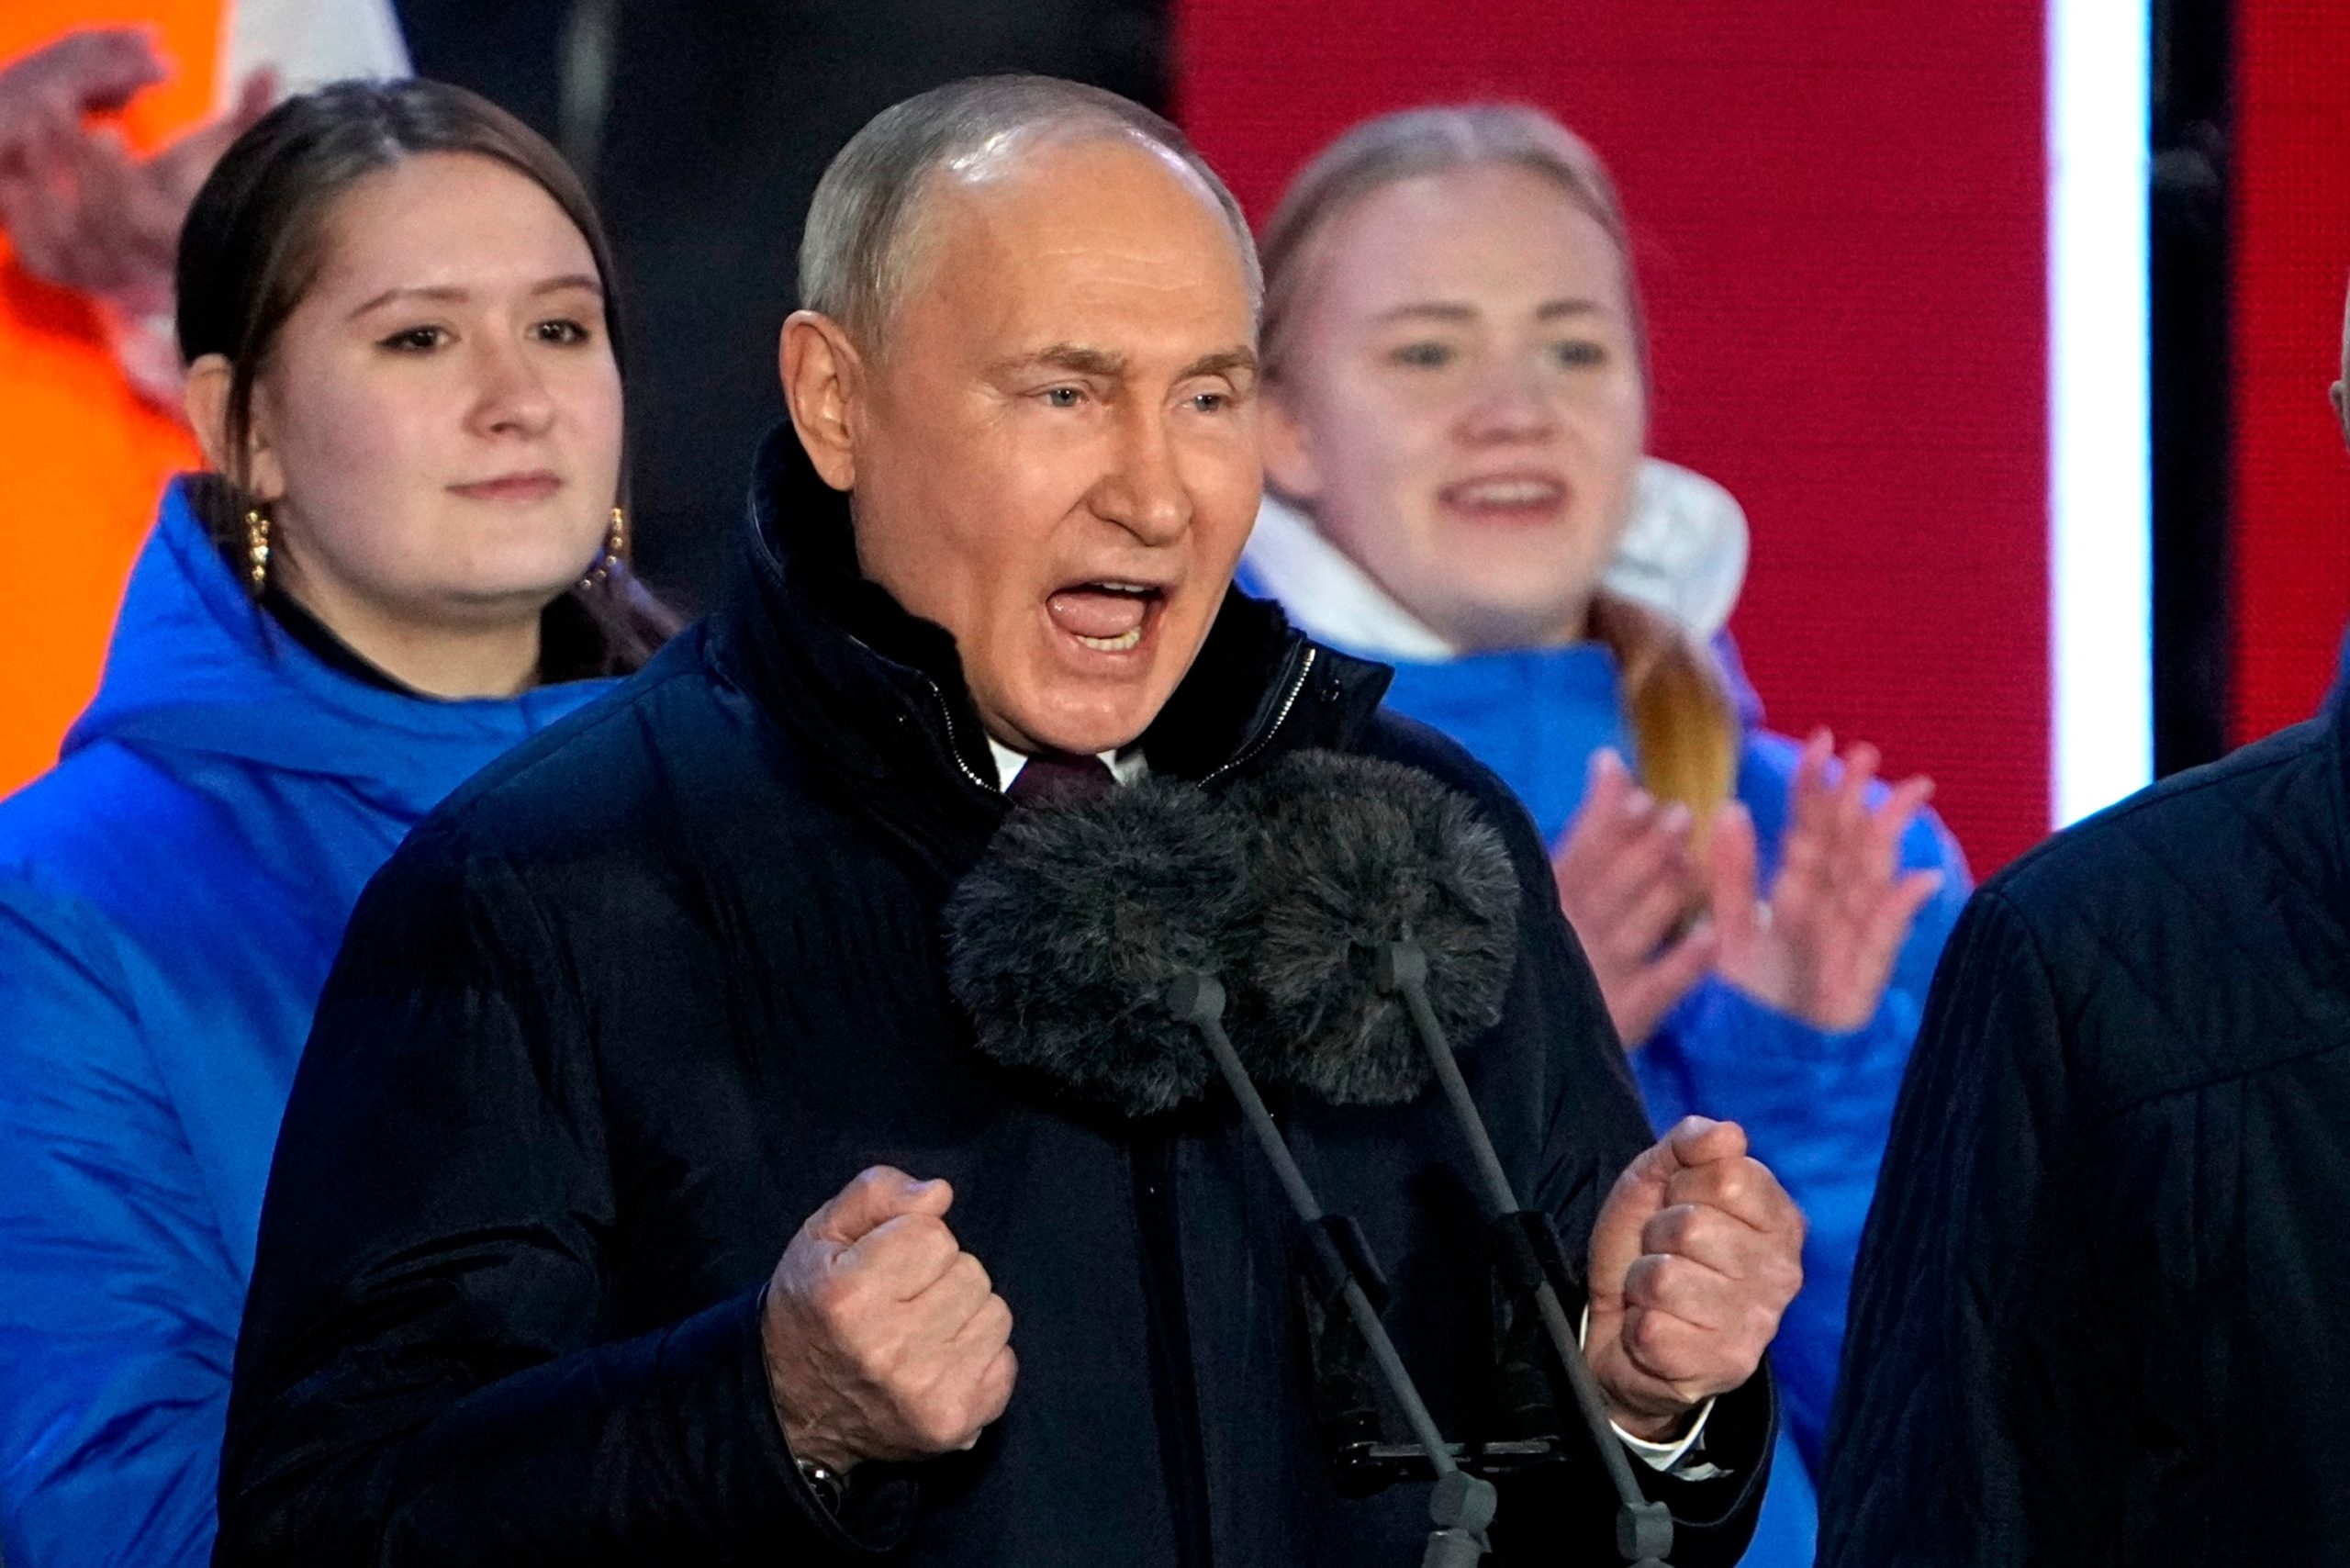 Putin wins reelection in state-managed election, extending his rule